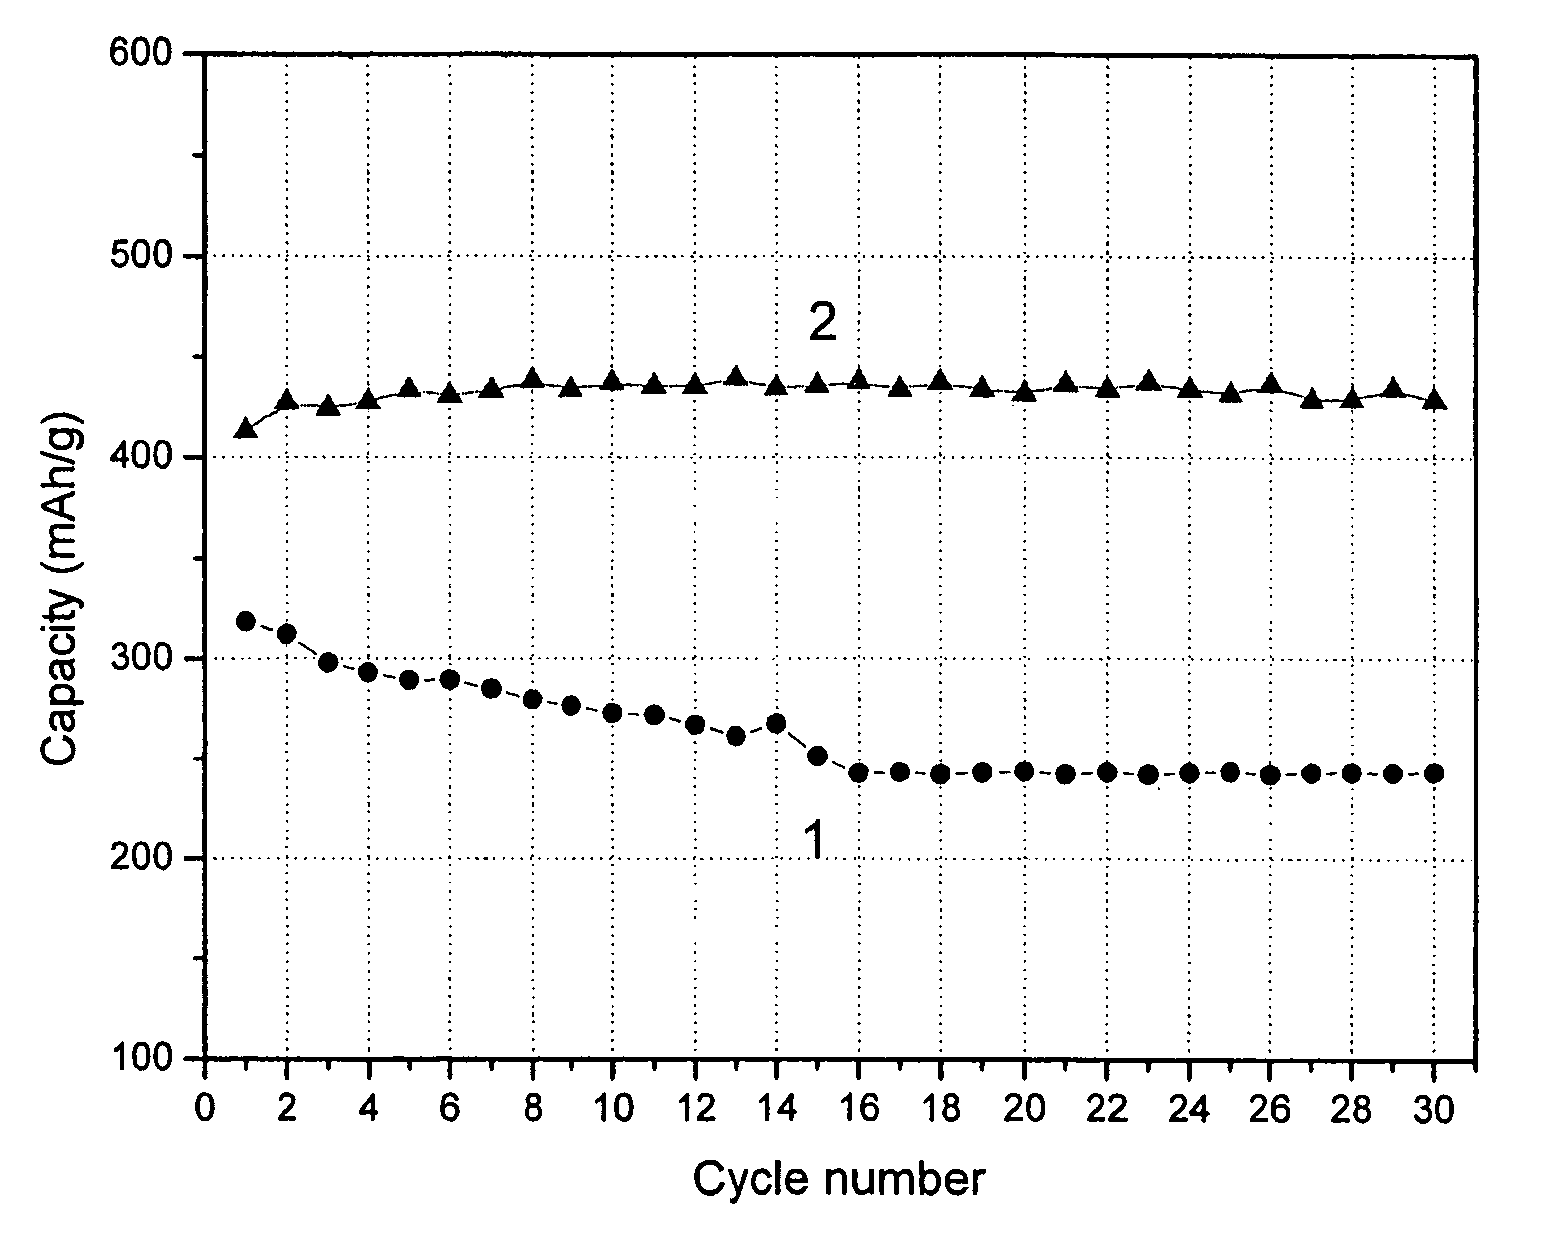 Lithium-ion battery incorporating carbon nanostructure materials